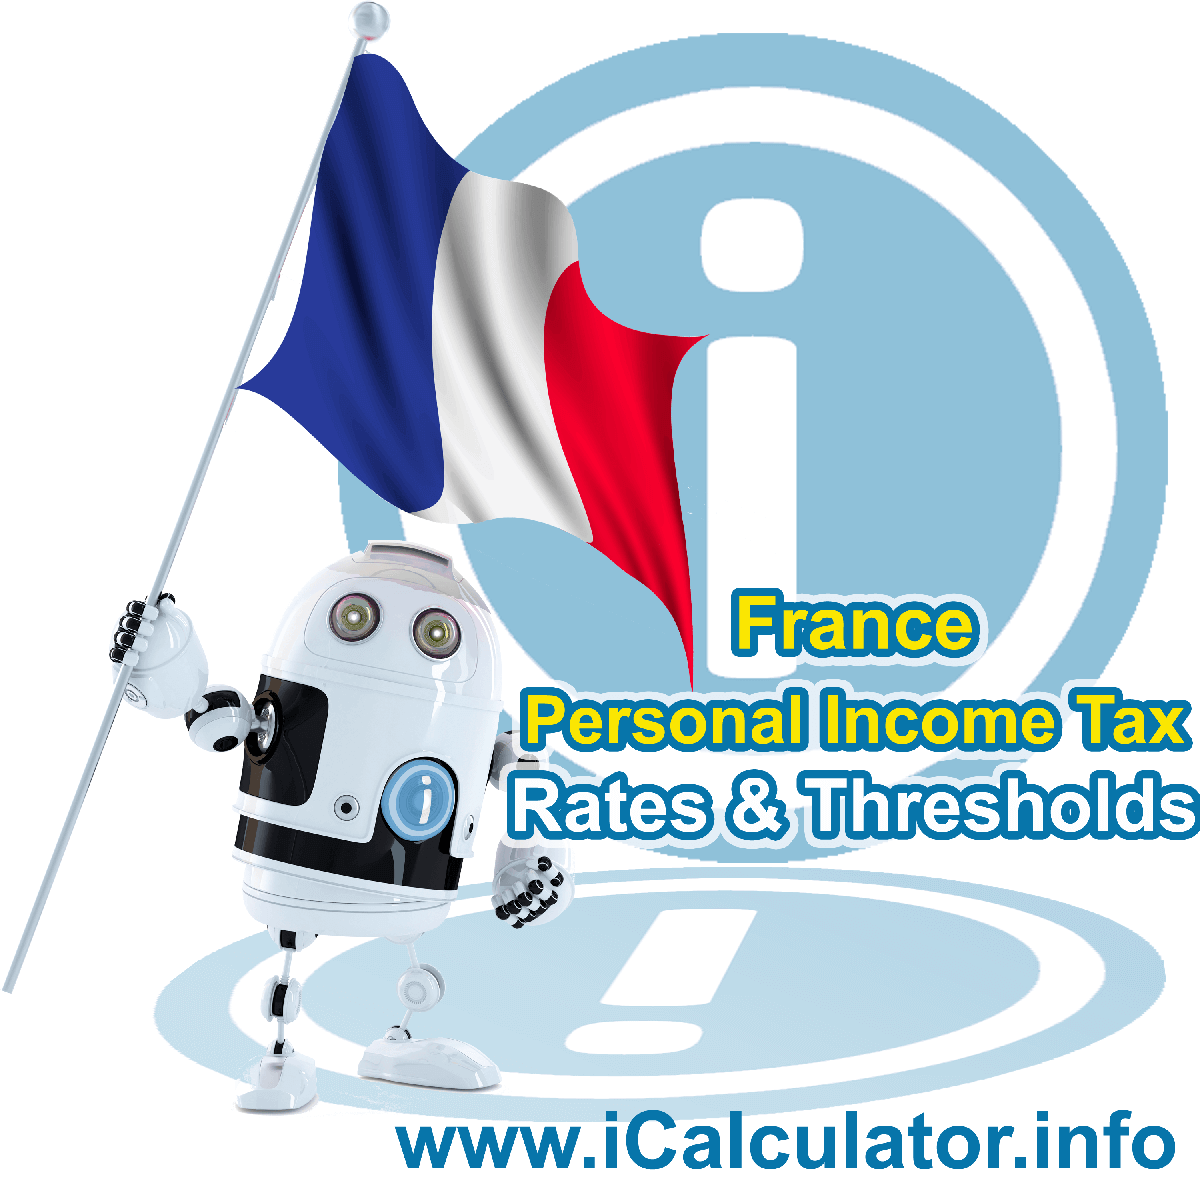 France Personal Income Tax Rates and Allowances in 2020. This image shows the France flag and information relating to the income tax formula and payroll formulas used for calculating income Tax in France using the France personal income tax rates, thresholds and allowances in 2023